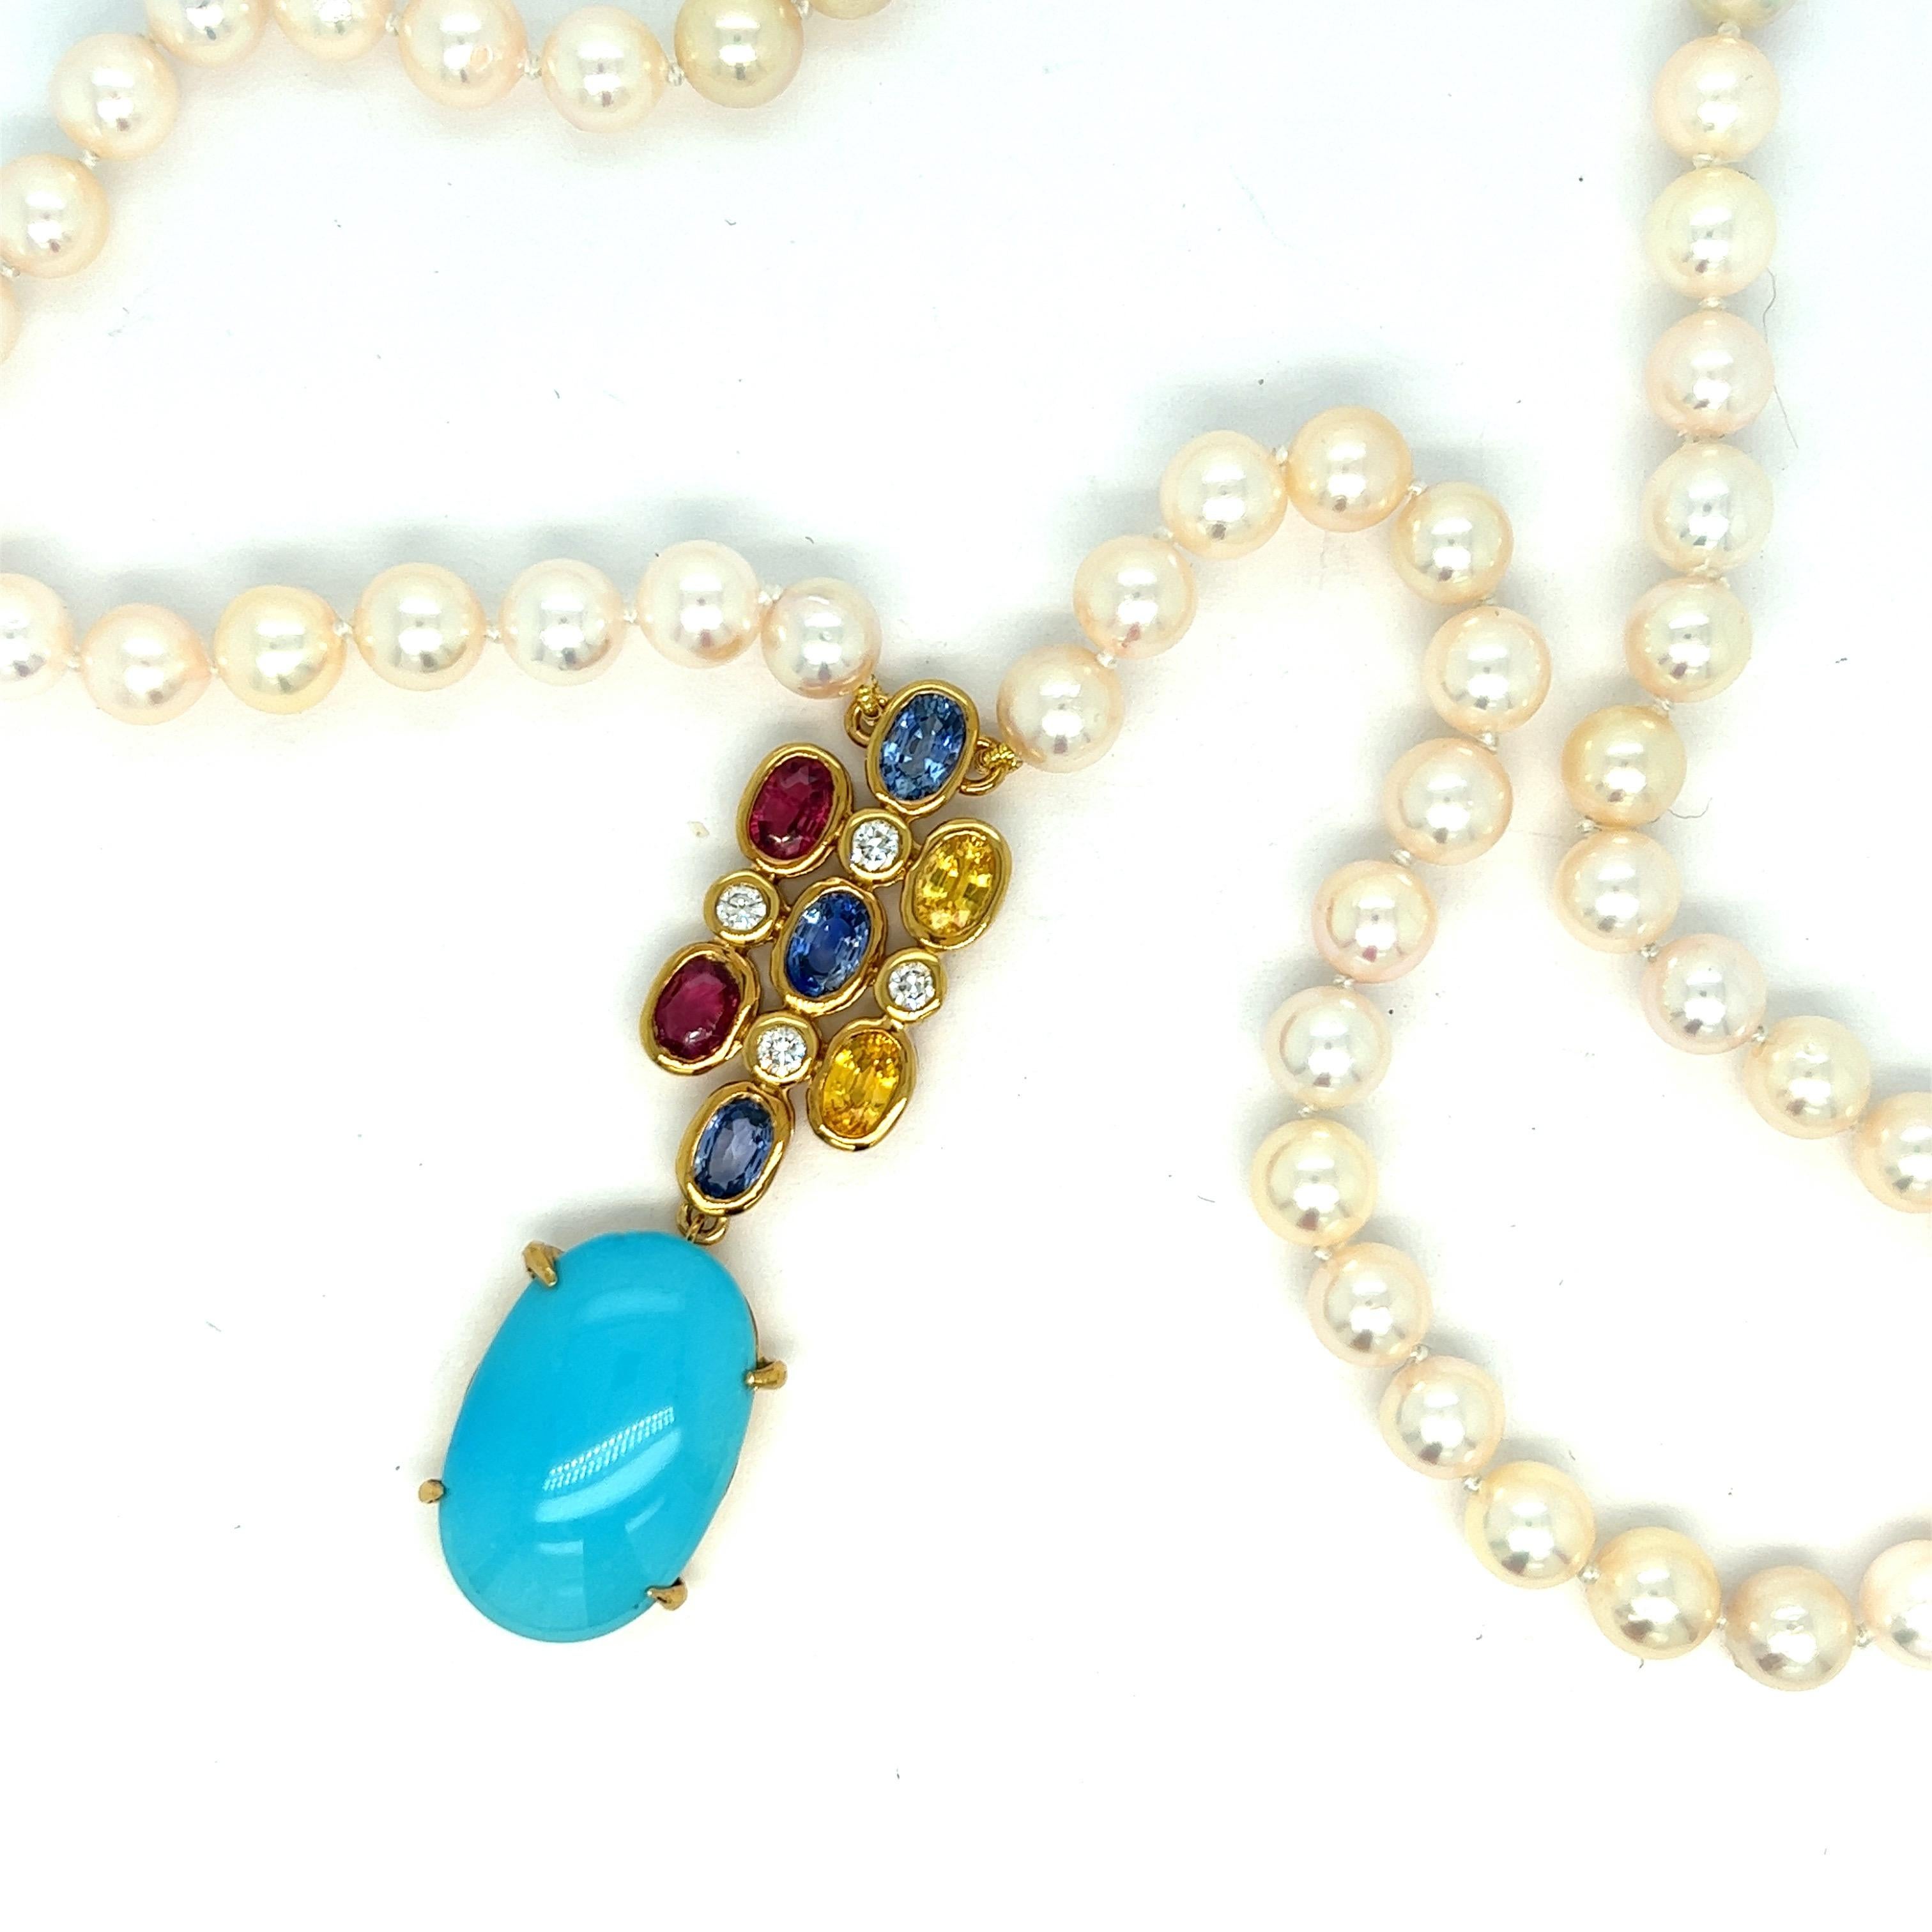 Persian turquoise and multi-color sapphire pearl necklace

Cabochon Persian turquoise (14x22mm), oval-shaped sapphires of pink, yellow, and blue, round-cut diamonds; set on yellow gold; cultured pearls

Size: pendant width 0.56 inch, length 2.13